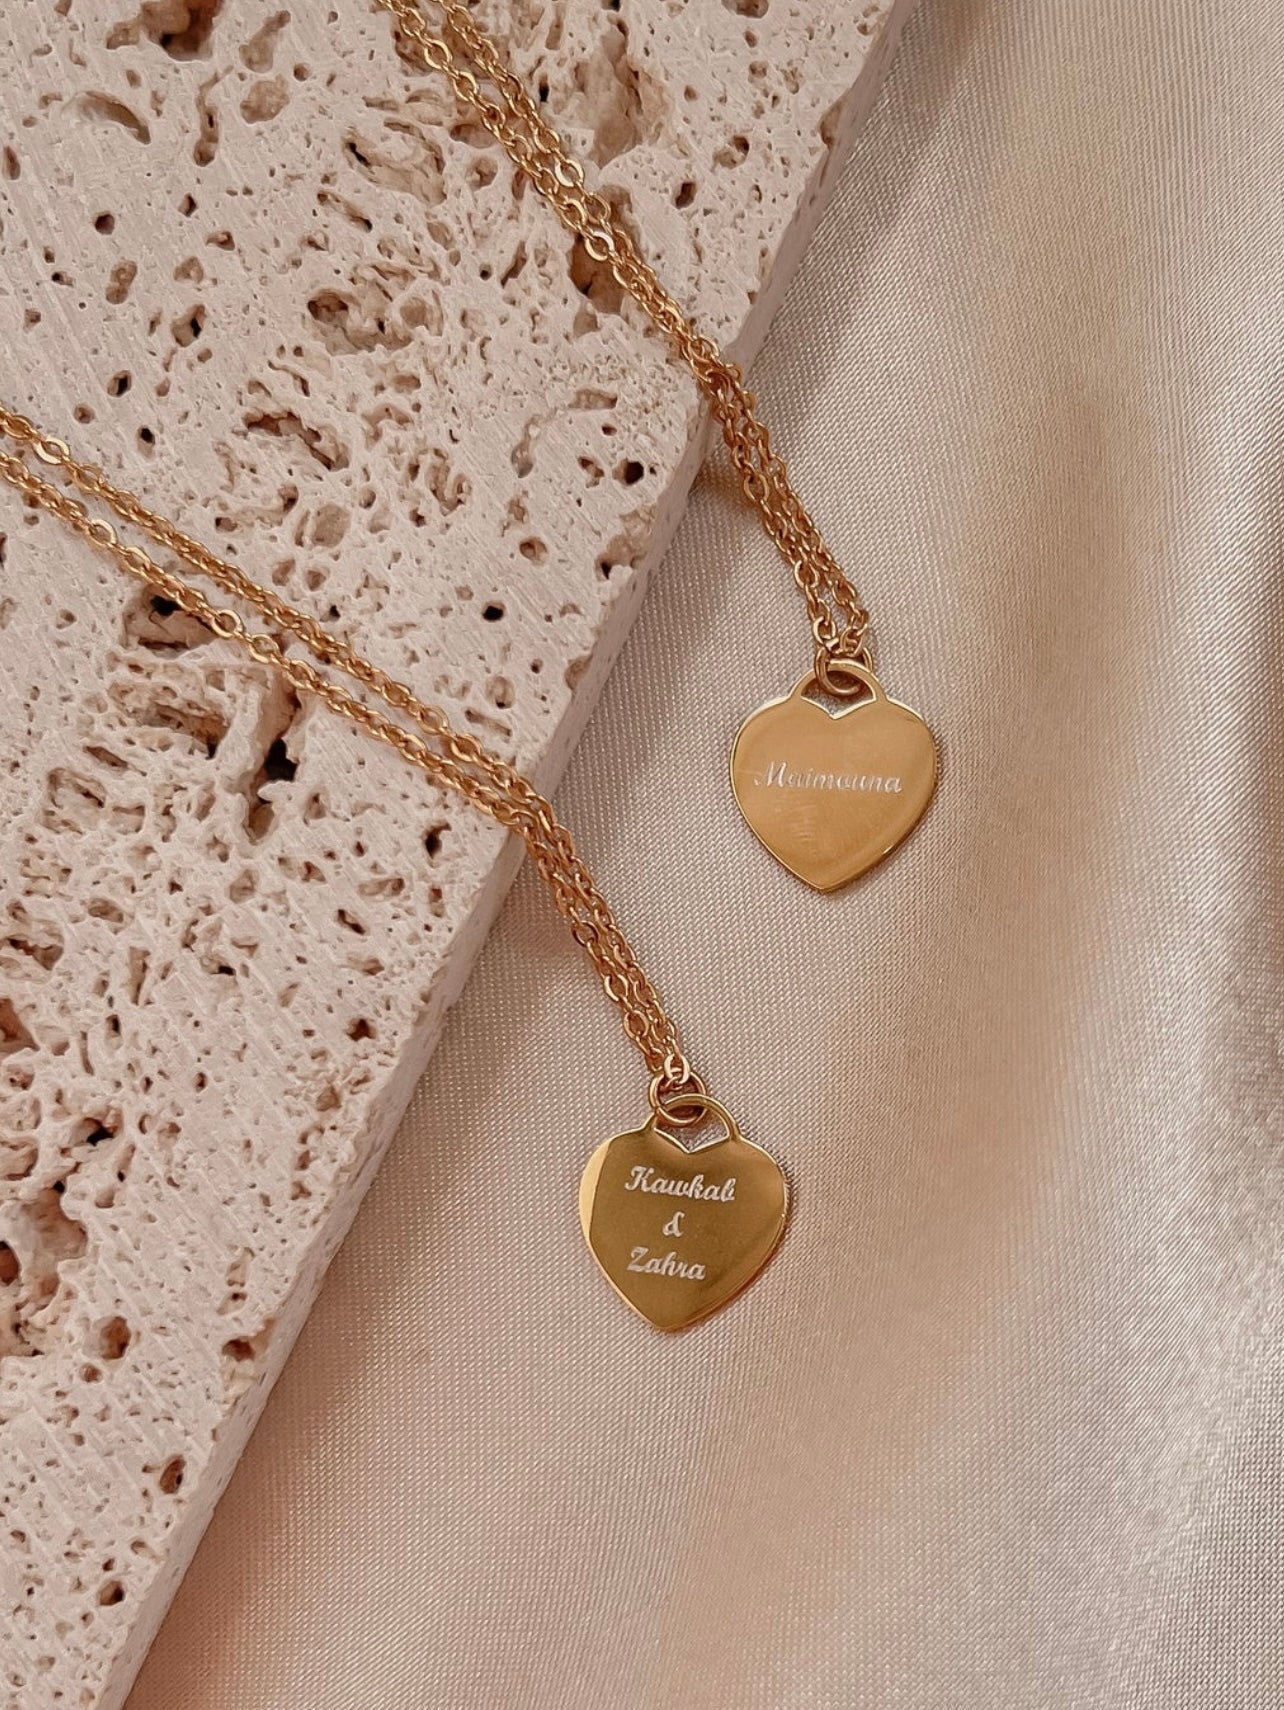 Buy Personalised Gift, Engraved Heart Necklace, Any Text, Name Date Necklace,  Gift for Her, Birthday, Anniversary Online in India - Etsy